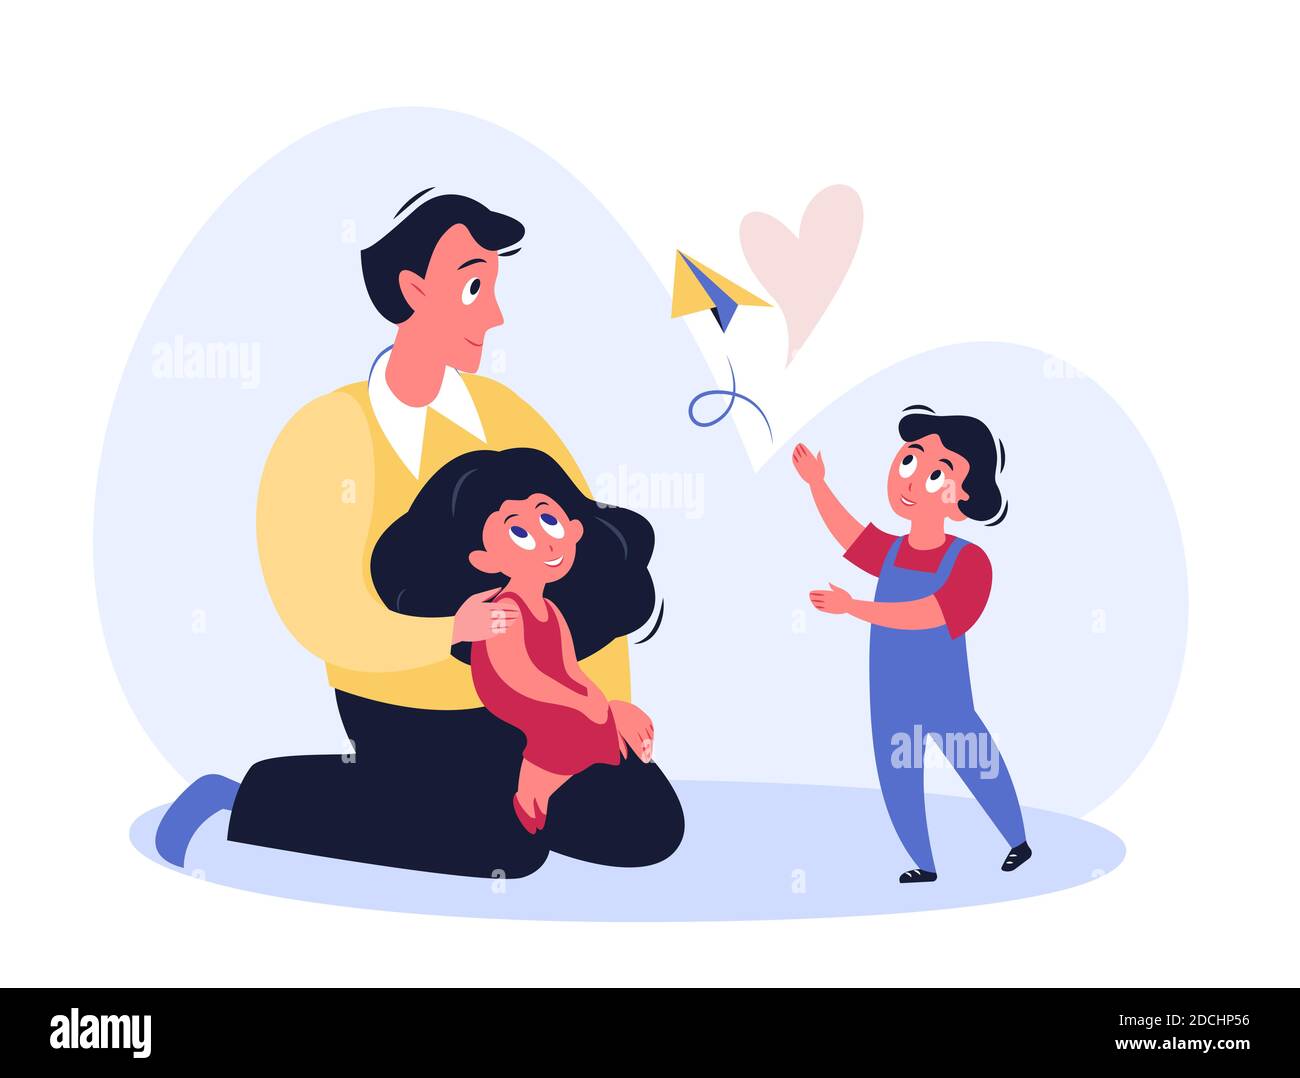 Father time vector illustration, cartoon flat family characters launch paper plane, spend happy fun time together concept isolated on white Stock Vector